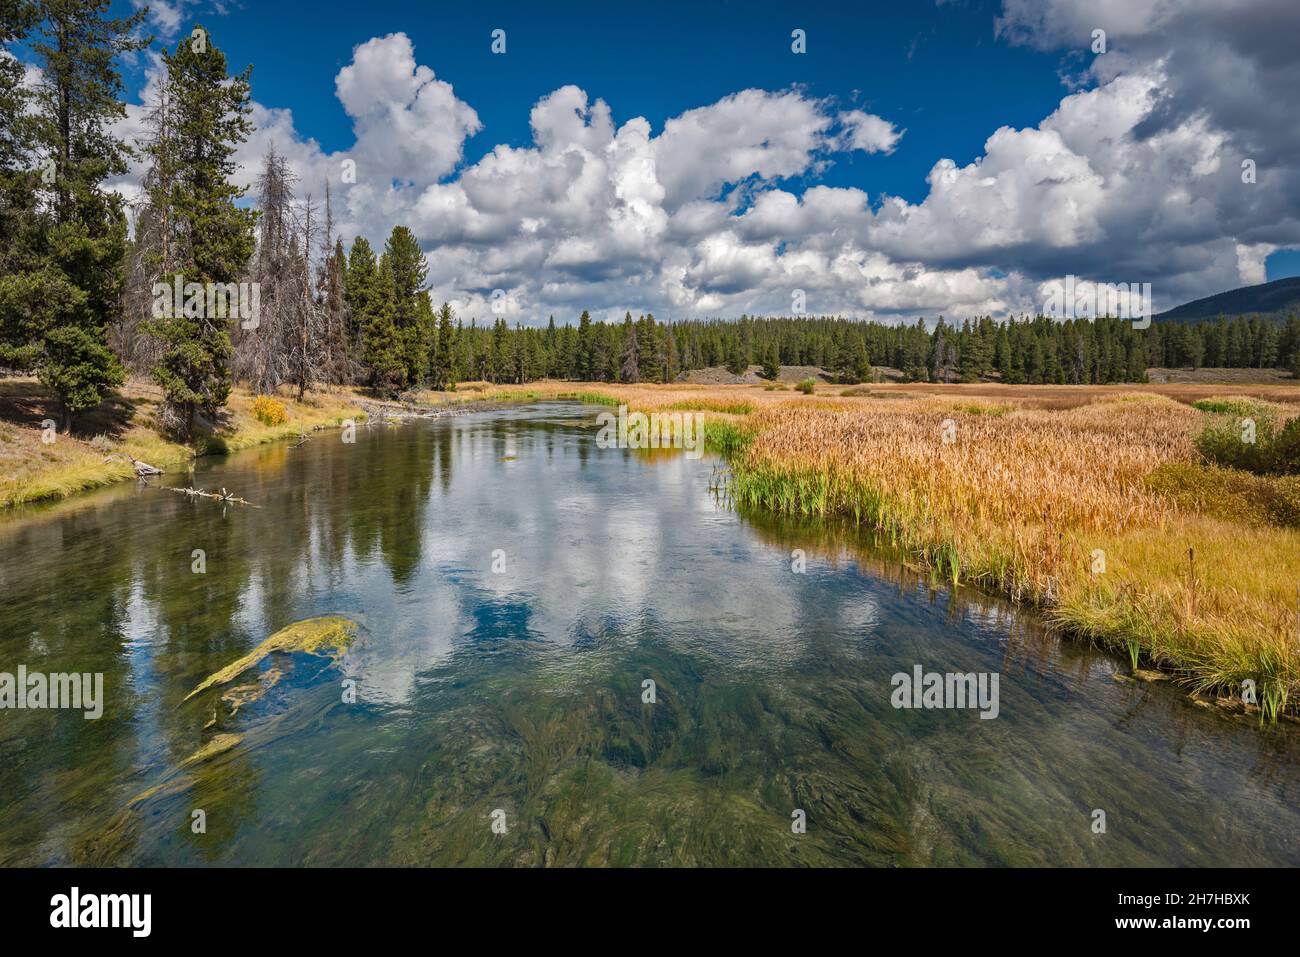 Glade Creek, from Grassy Lake Road, FR 261, John D. Rockefeller Jr. Memorial Parkway protected area, Greater Yellowstone Area, Wyoming, USA Stock Photo